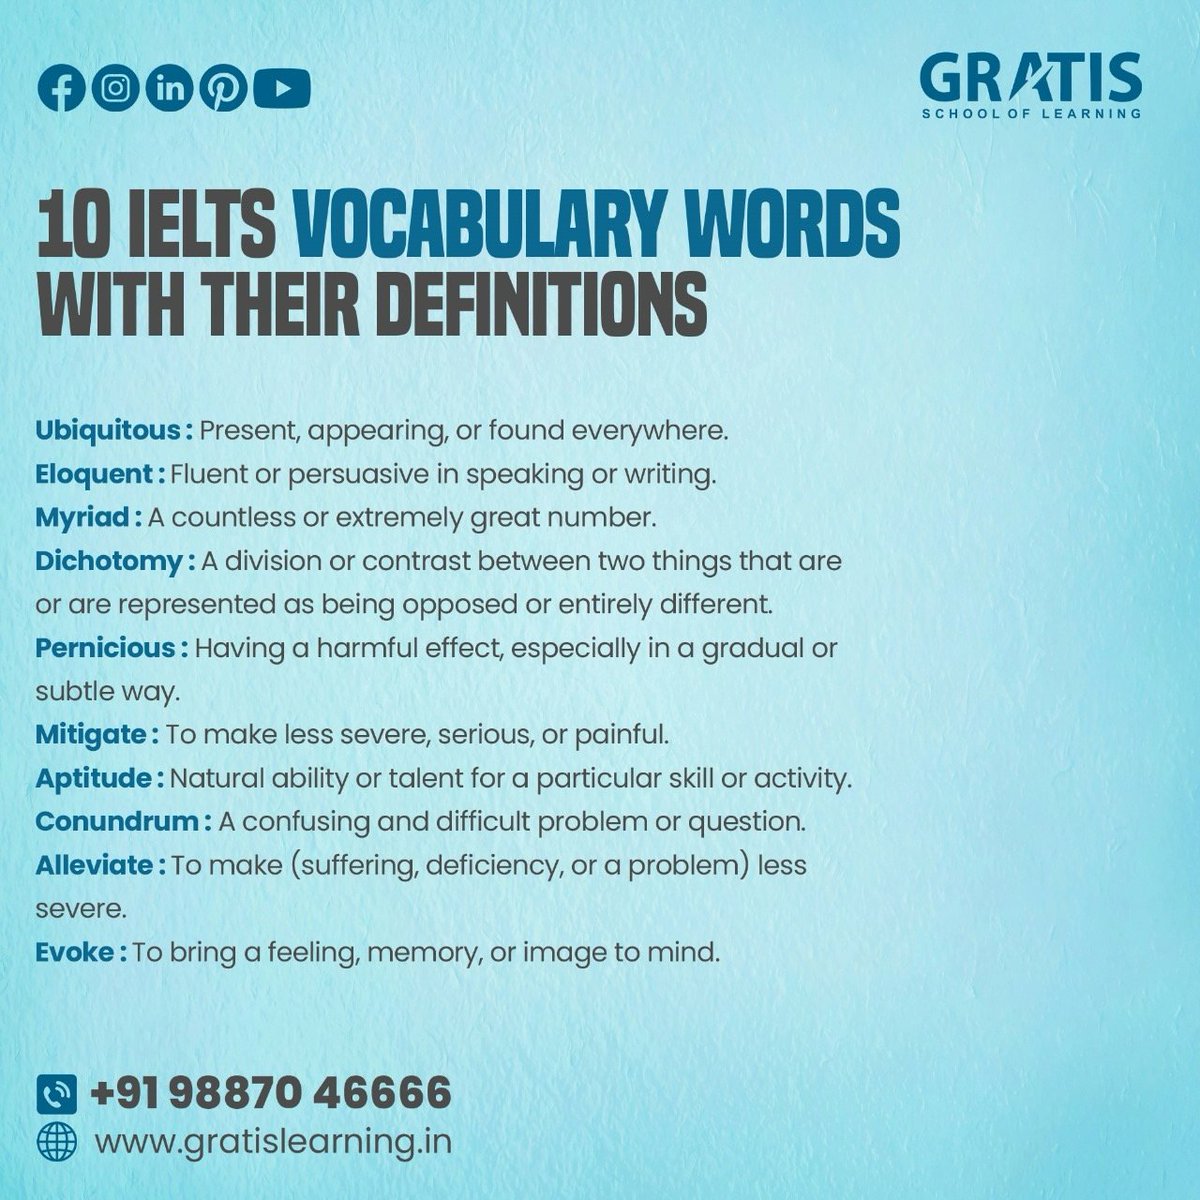 These words can help enhance your vocabulary and improve your writing and speaking skills for the IELTS exam. 
🌐 gratislearning.in
☎️9887046666
#GratisLearning  #Panchkula #IELTSSkills #VocabularyEnhancement #WritingAndSpeaking #ExamPreparation #LanguageMastery